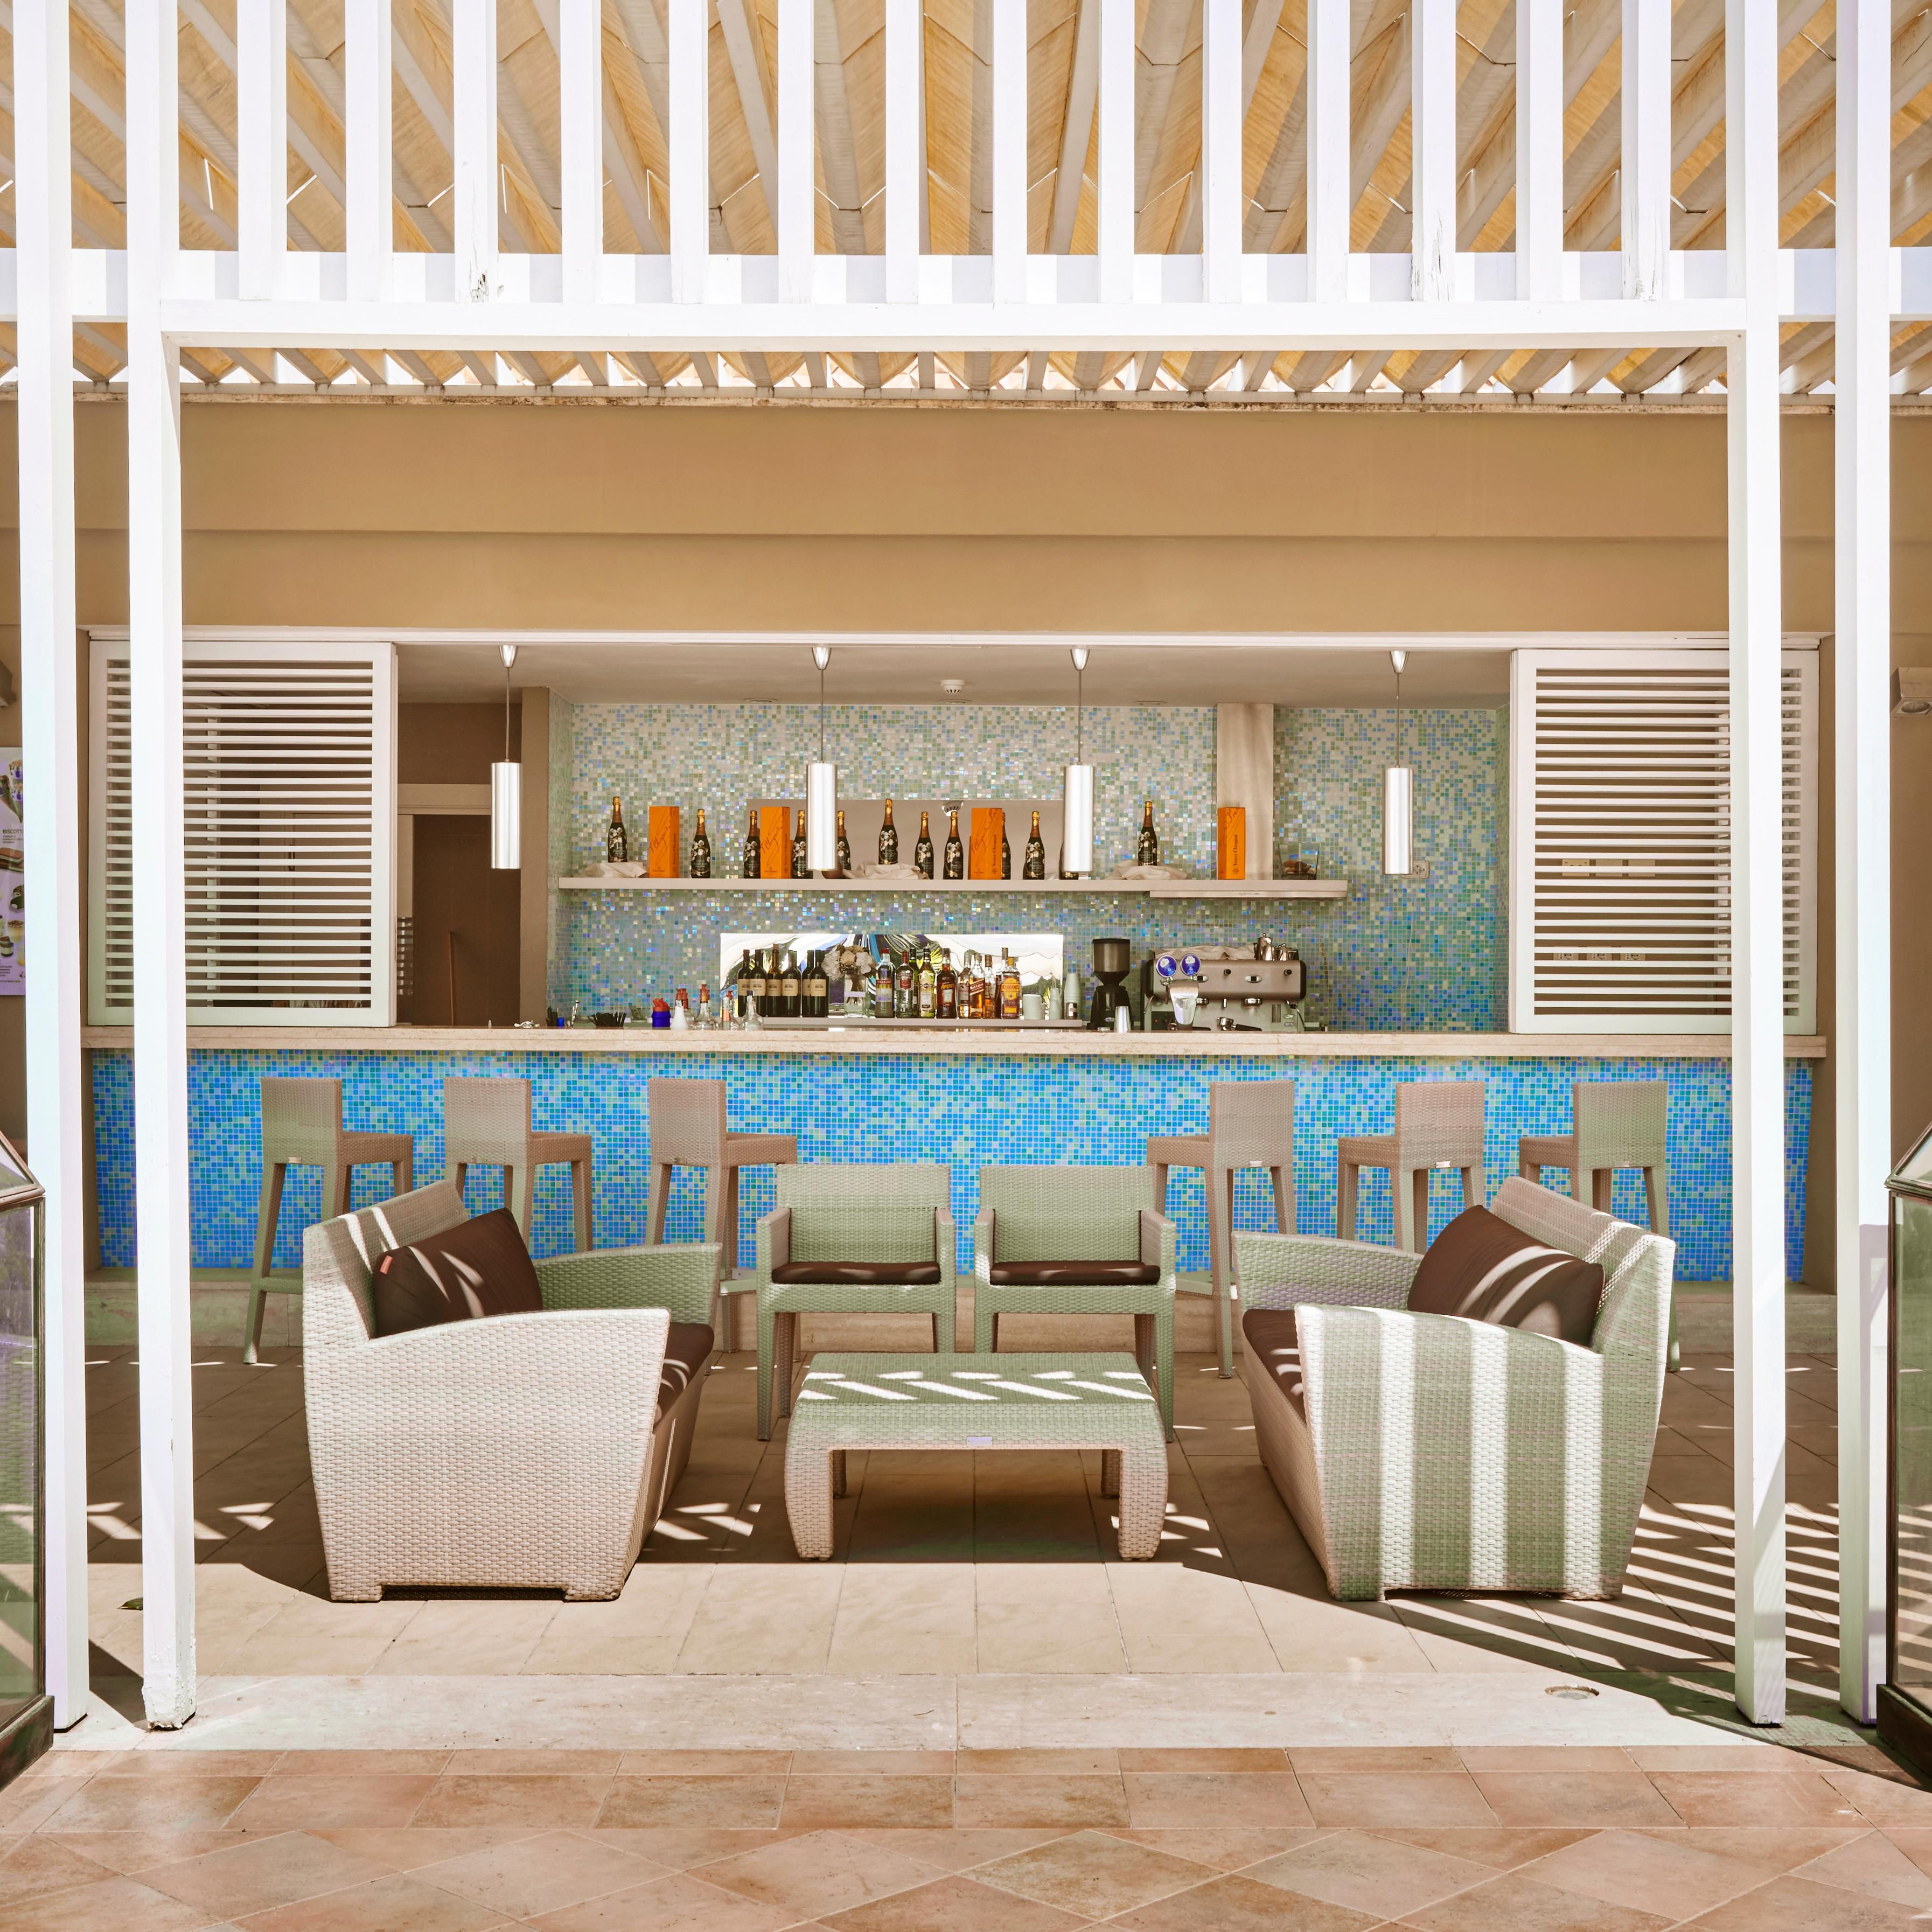 Our Pool Bar offers express dishes and drinks